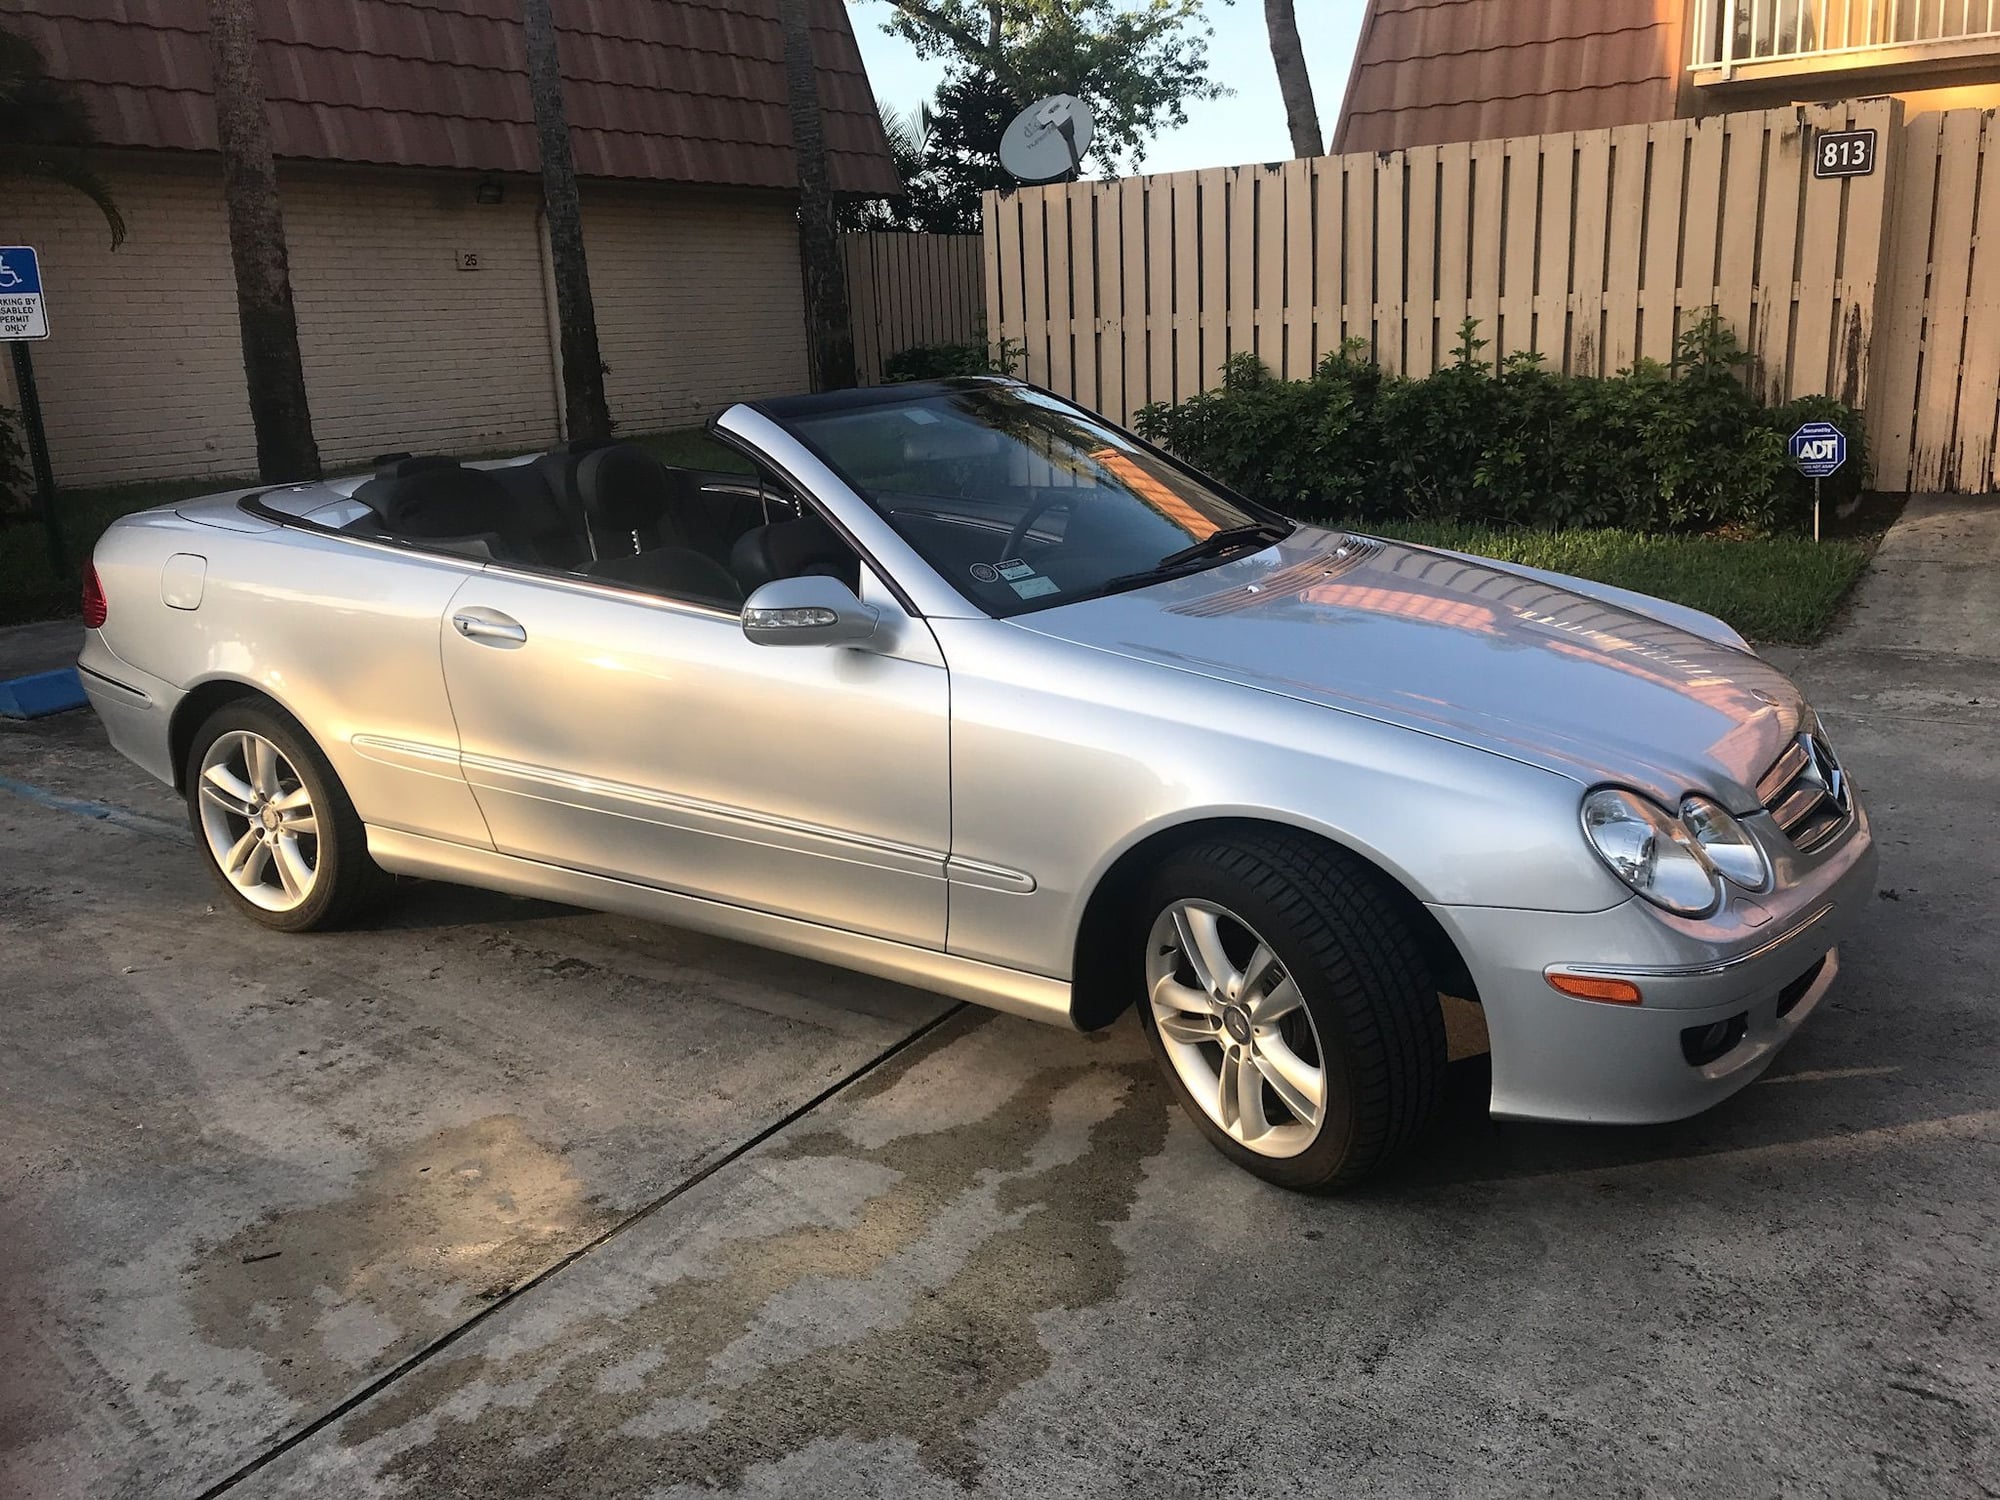 2006 Mercedes-Benz CLK350 - Well cared for and maintained convertible, premium 3, fully optioned. - Used - VIN wdbtk56g86t063569 - 64,000 Miles - 6 cyl - 2WD - Automatic - Convertible - Silver - West Palm Beach, FL 33409, United States